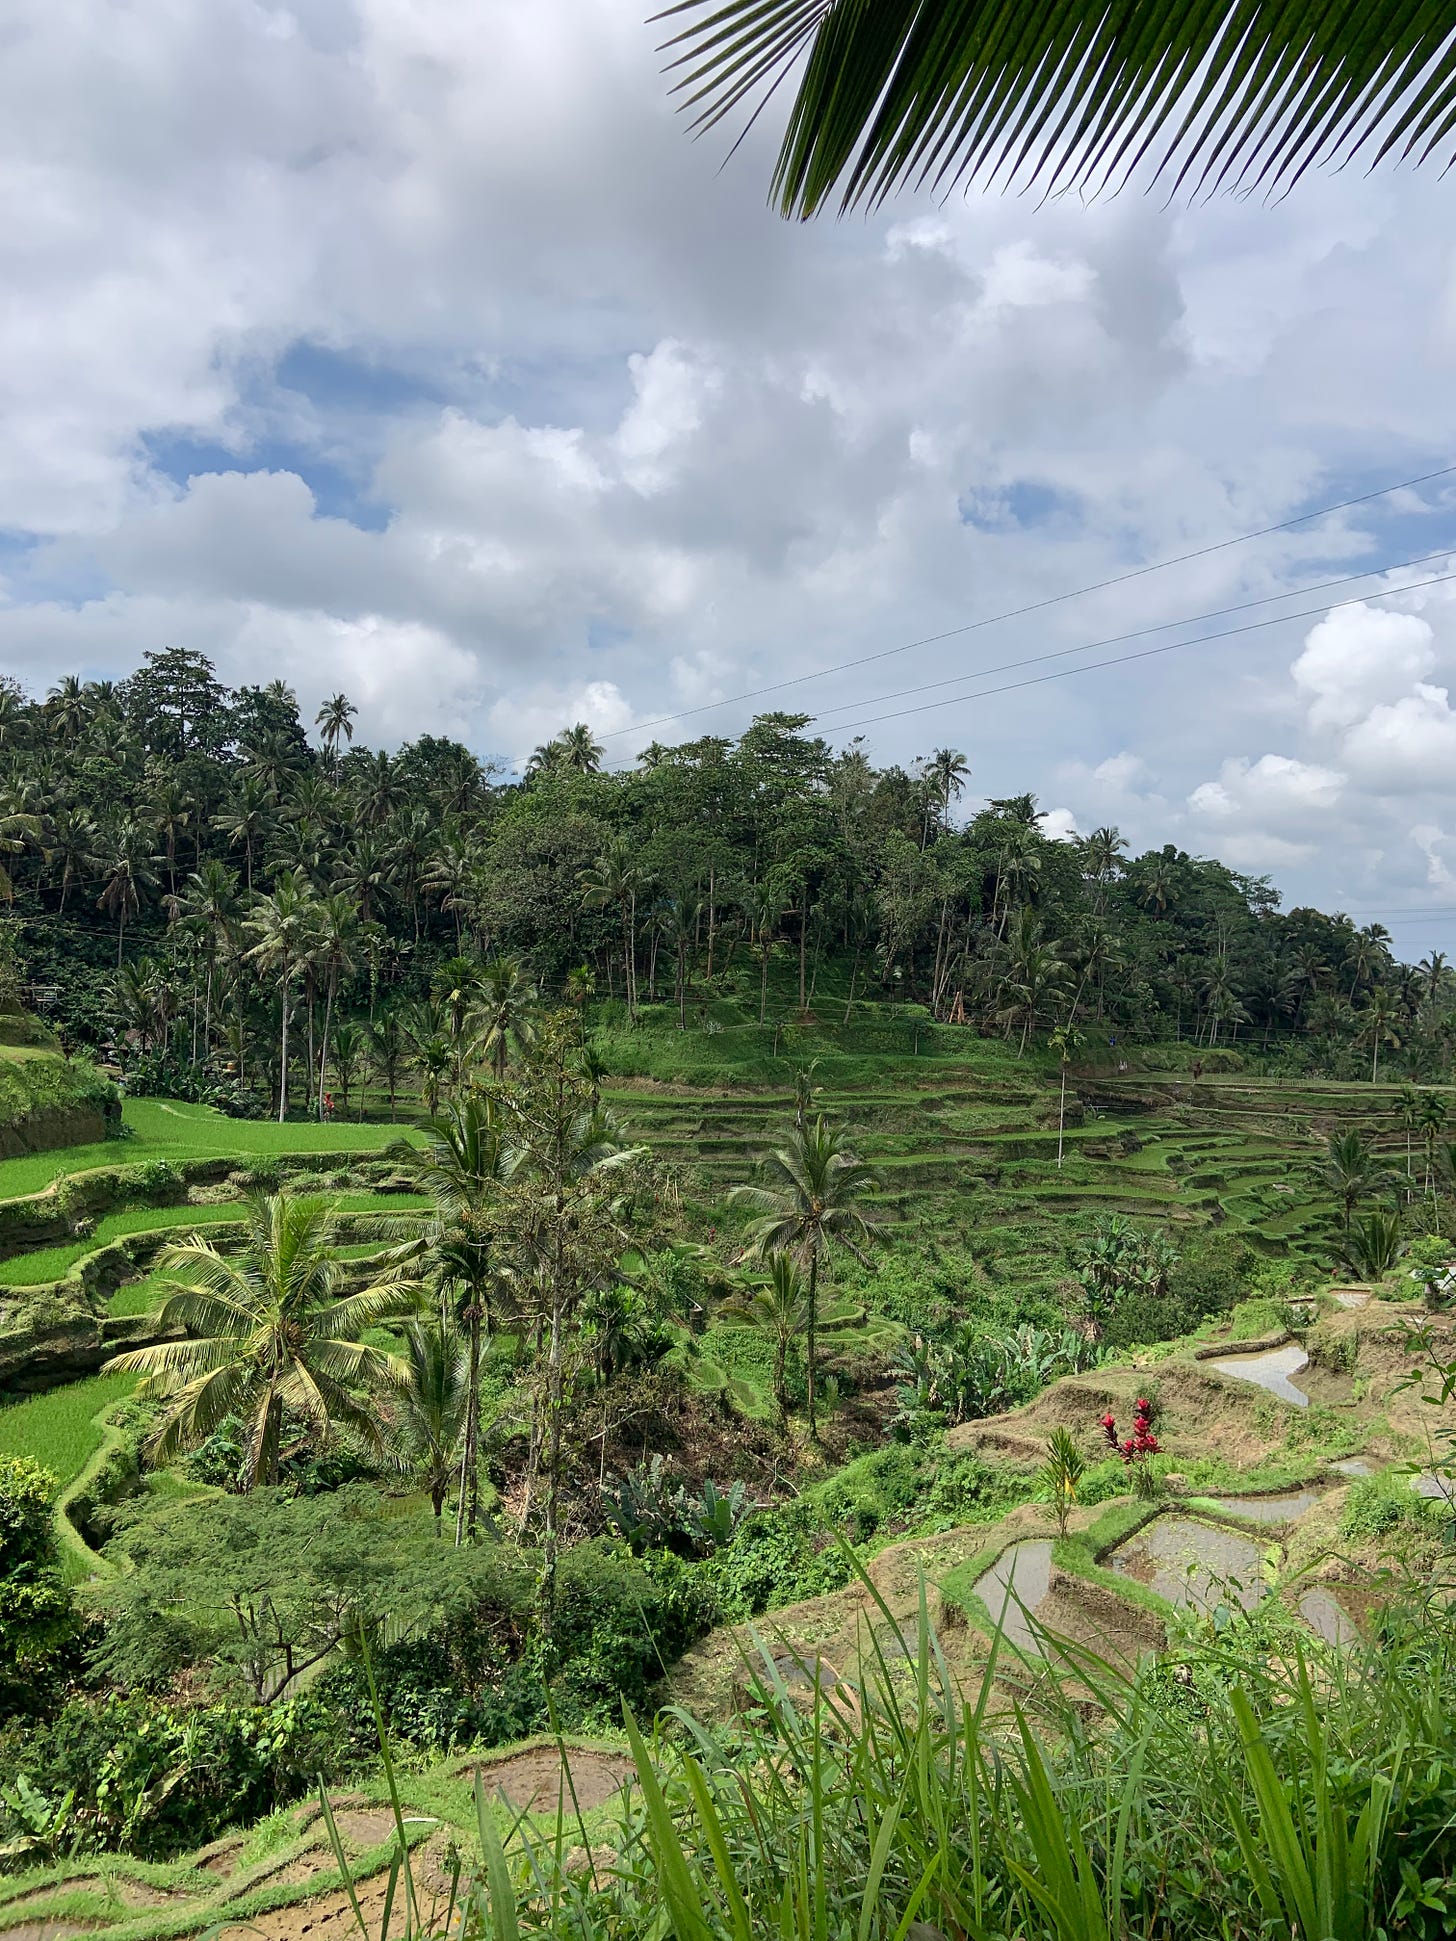 Rice field scattered with tall palm trees